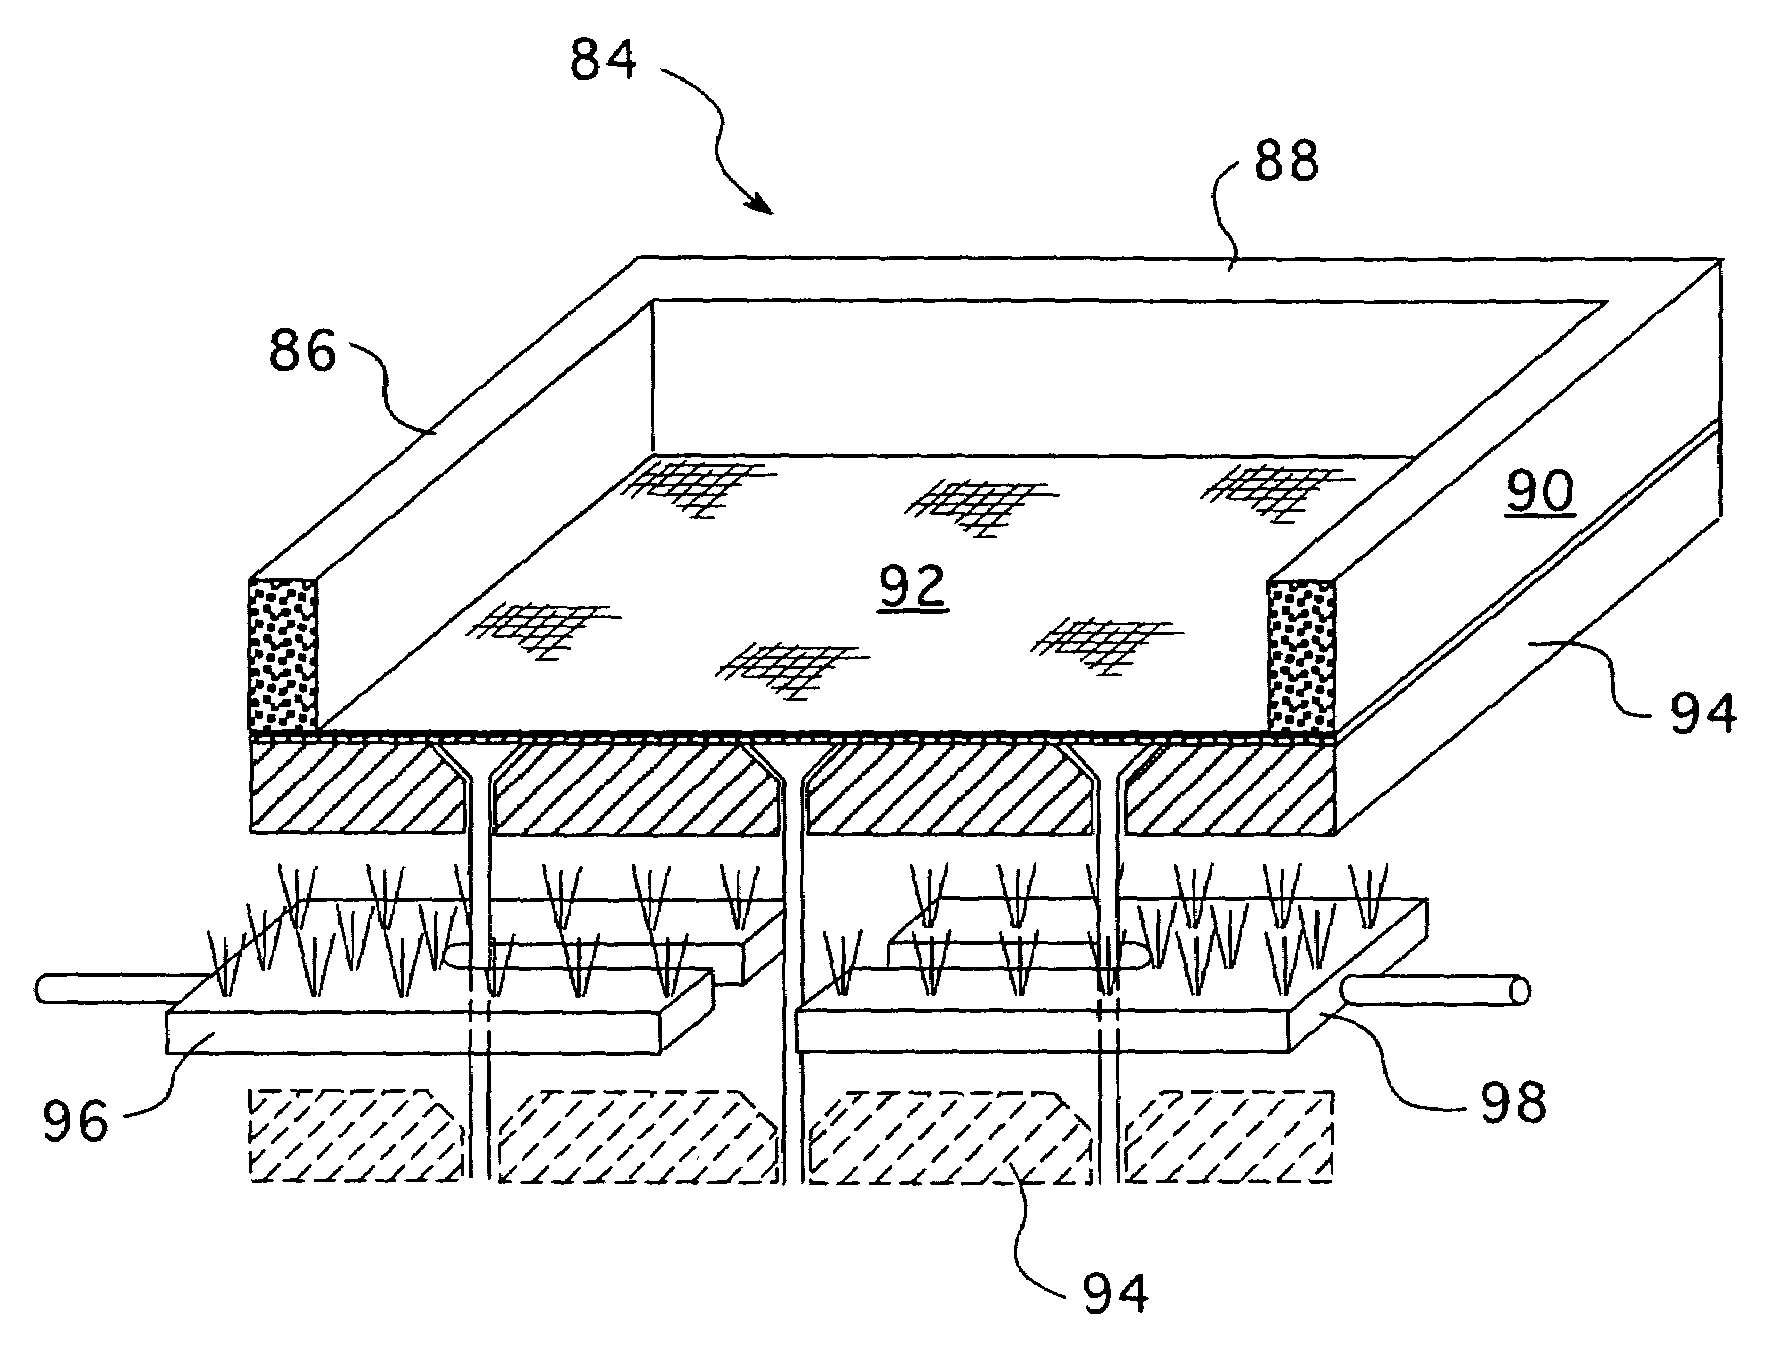 Method of unidirectional solidification of castings and associated apparatus